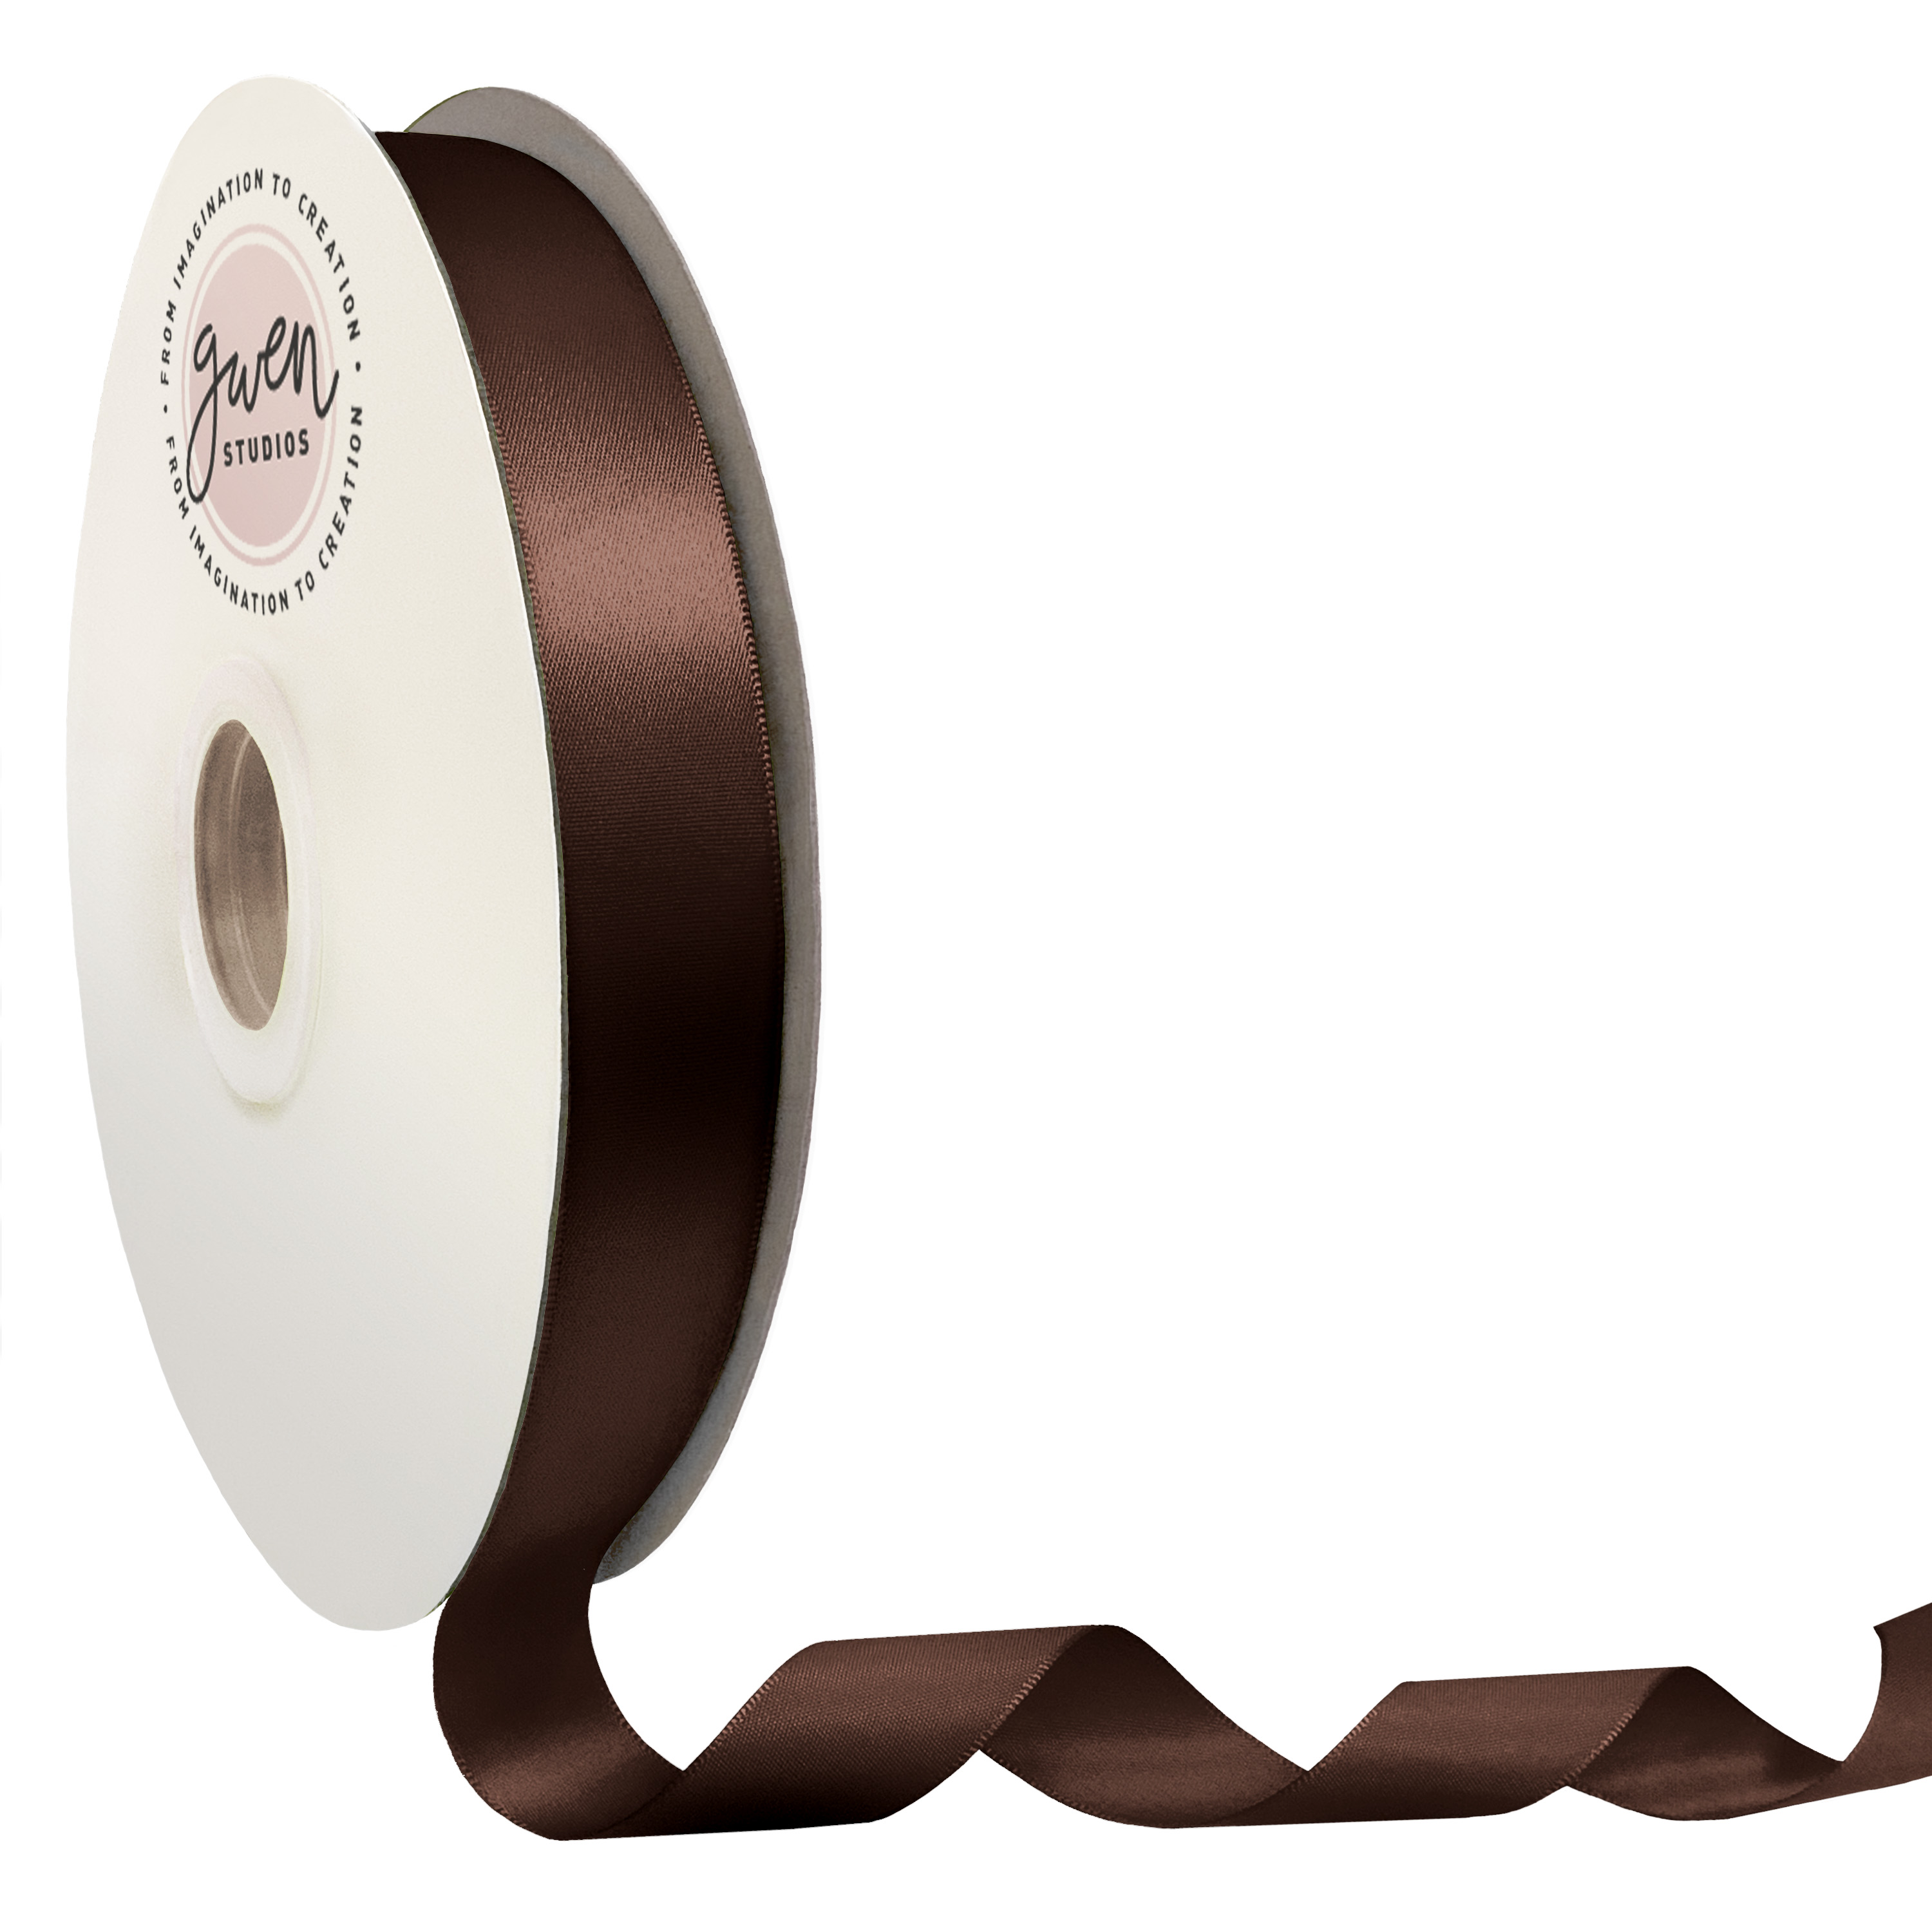 Brown Solid Double Faced Satin Ribbon for Crafts, 7/8 x 100 Yards by Gwen  Studios